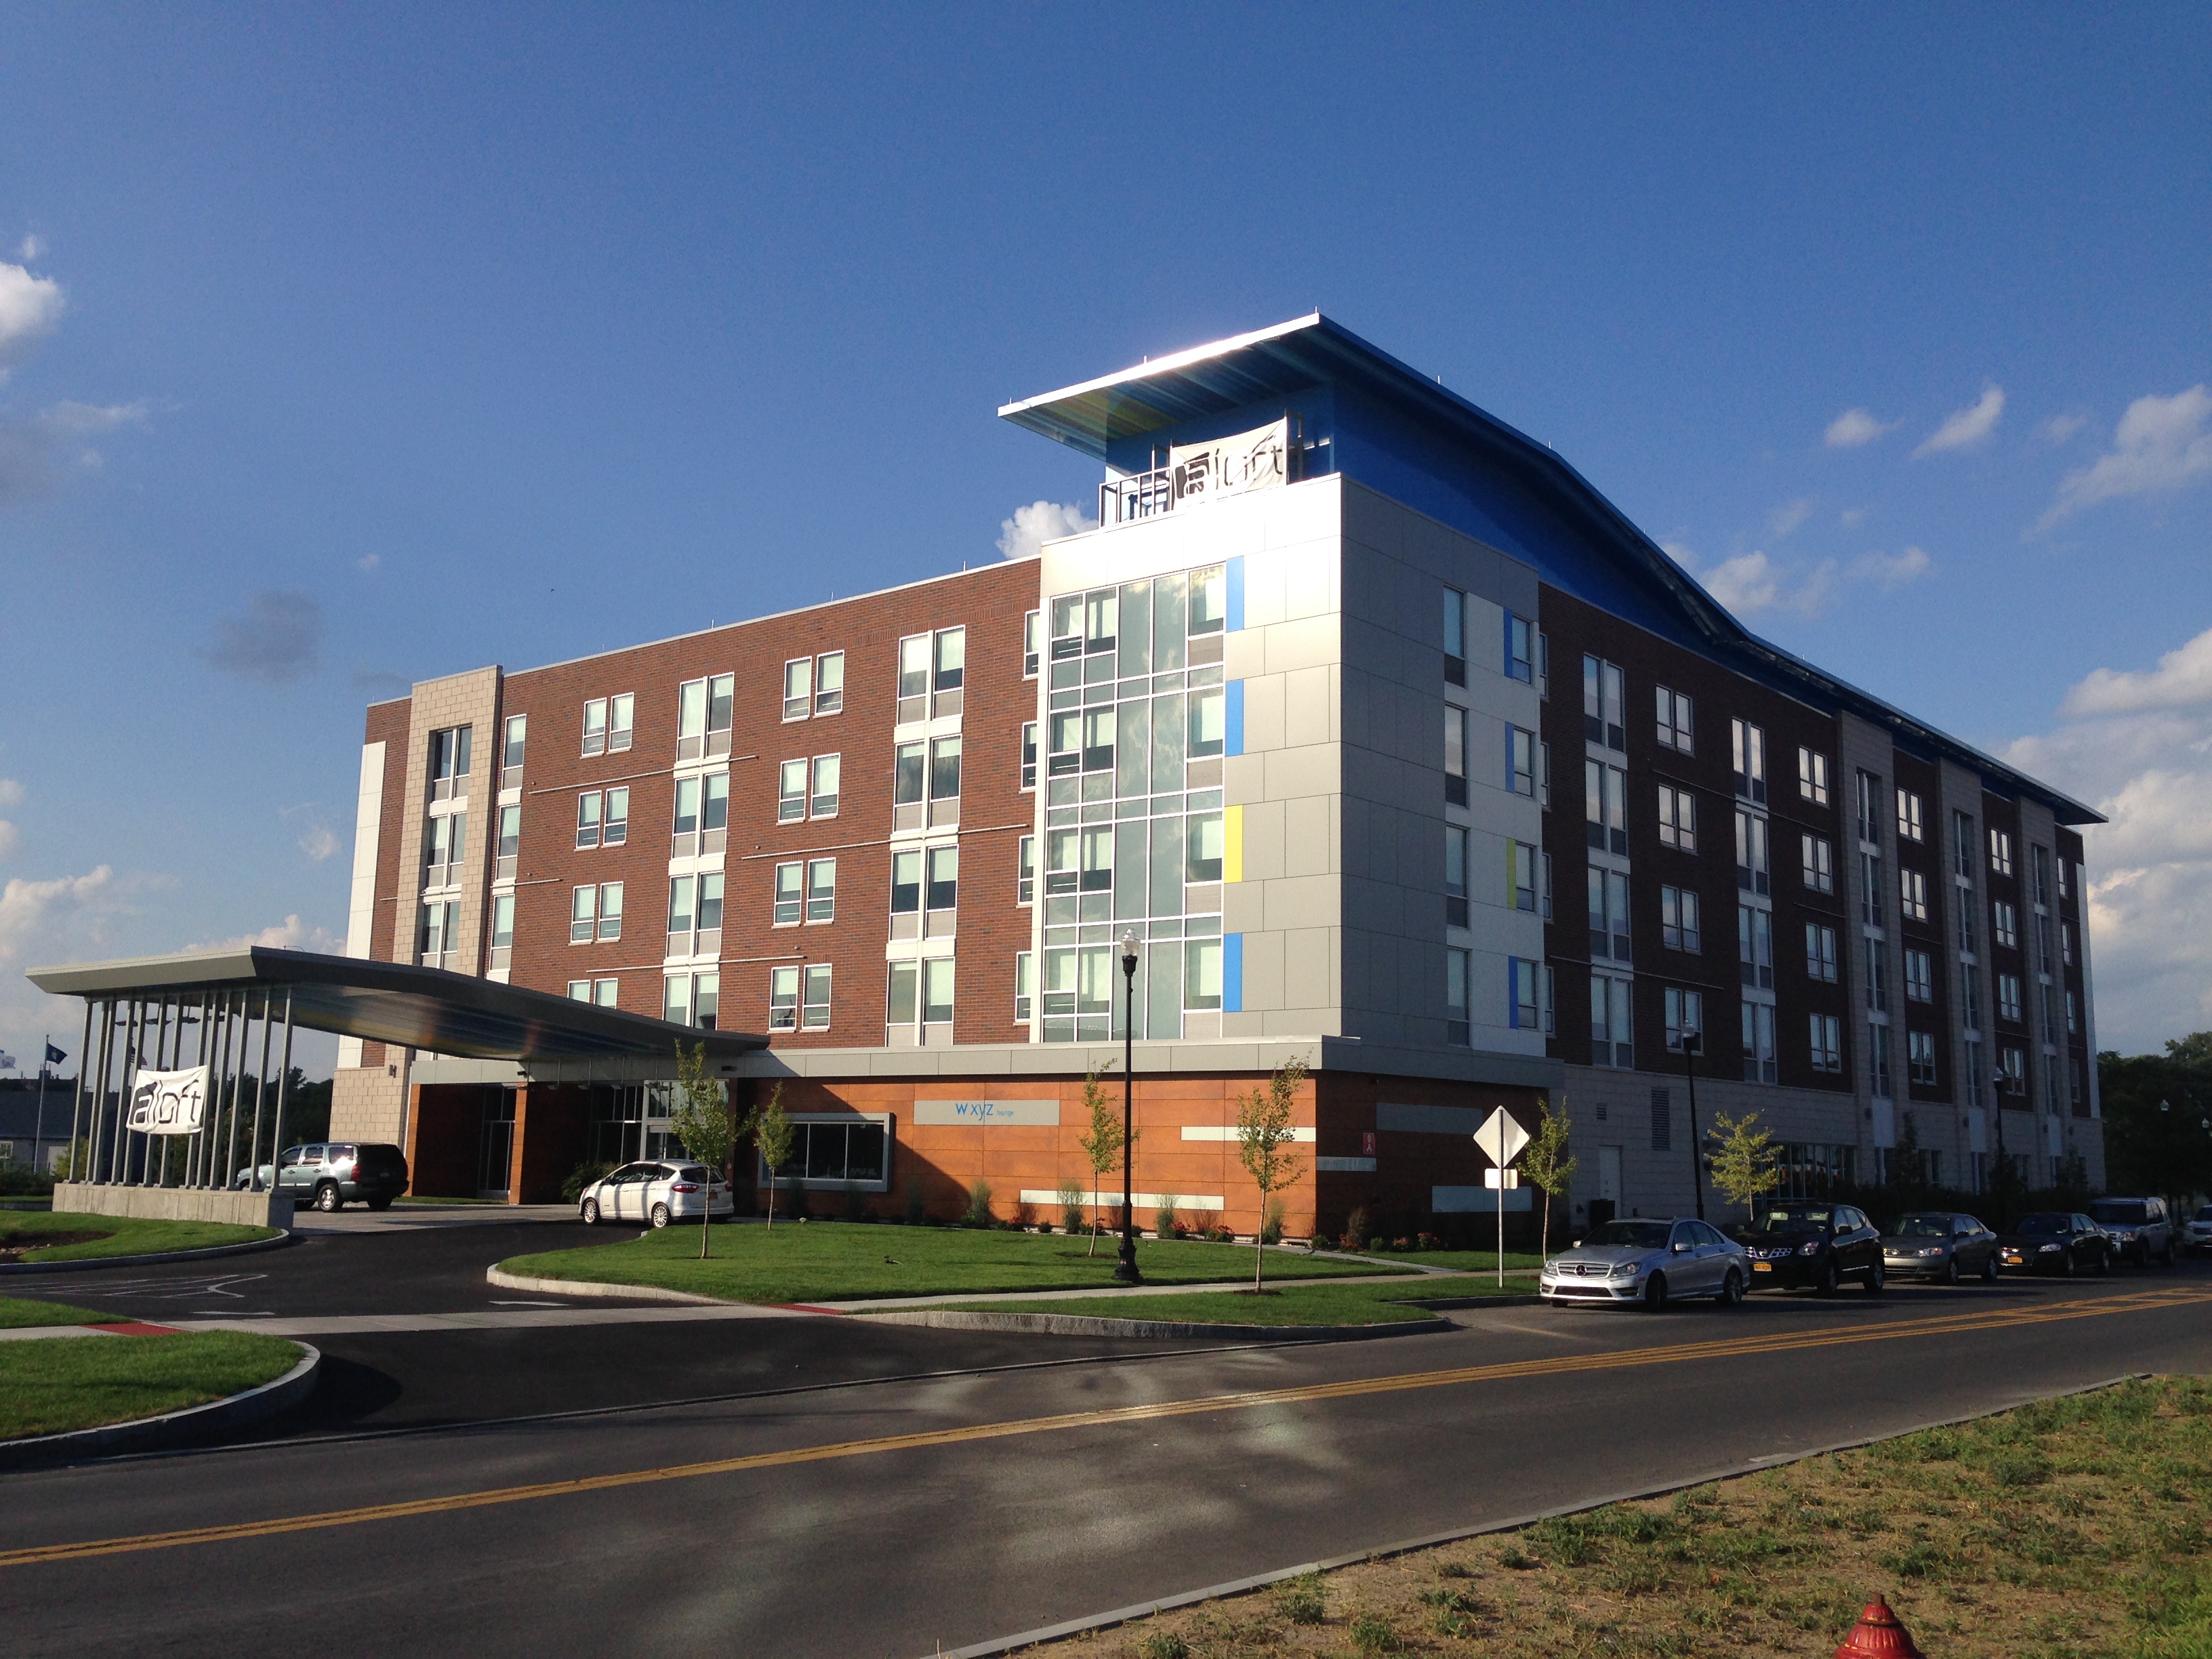 John P. Stopen Aloft Hotel Inner Harbor Syracuse Project completed exterior